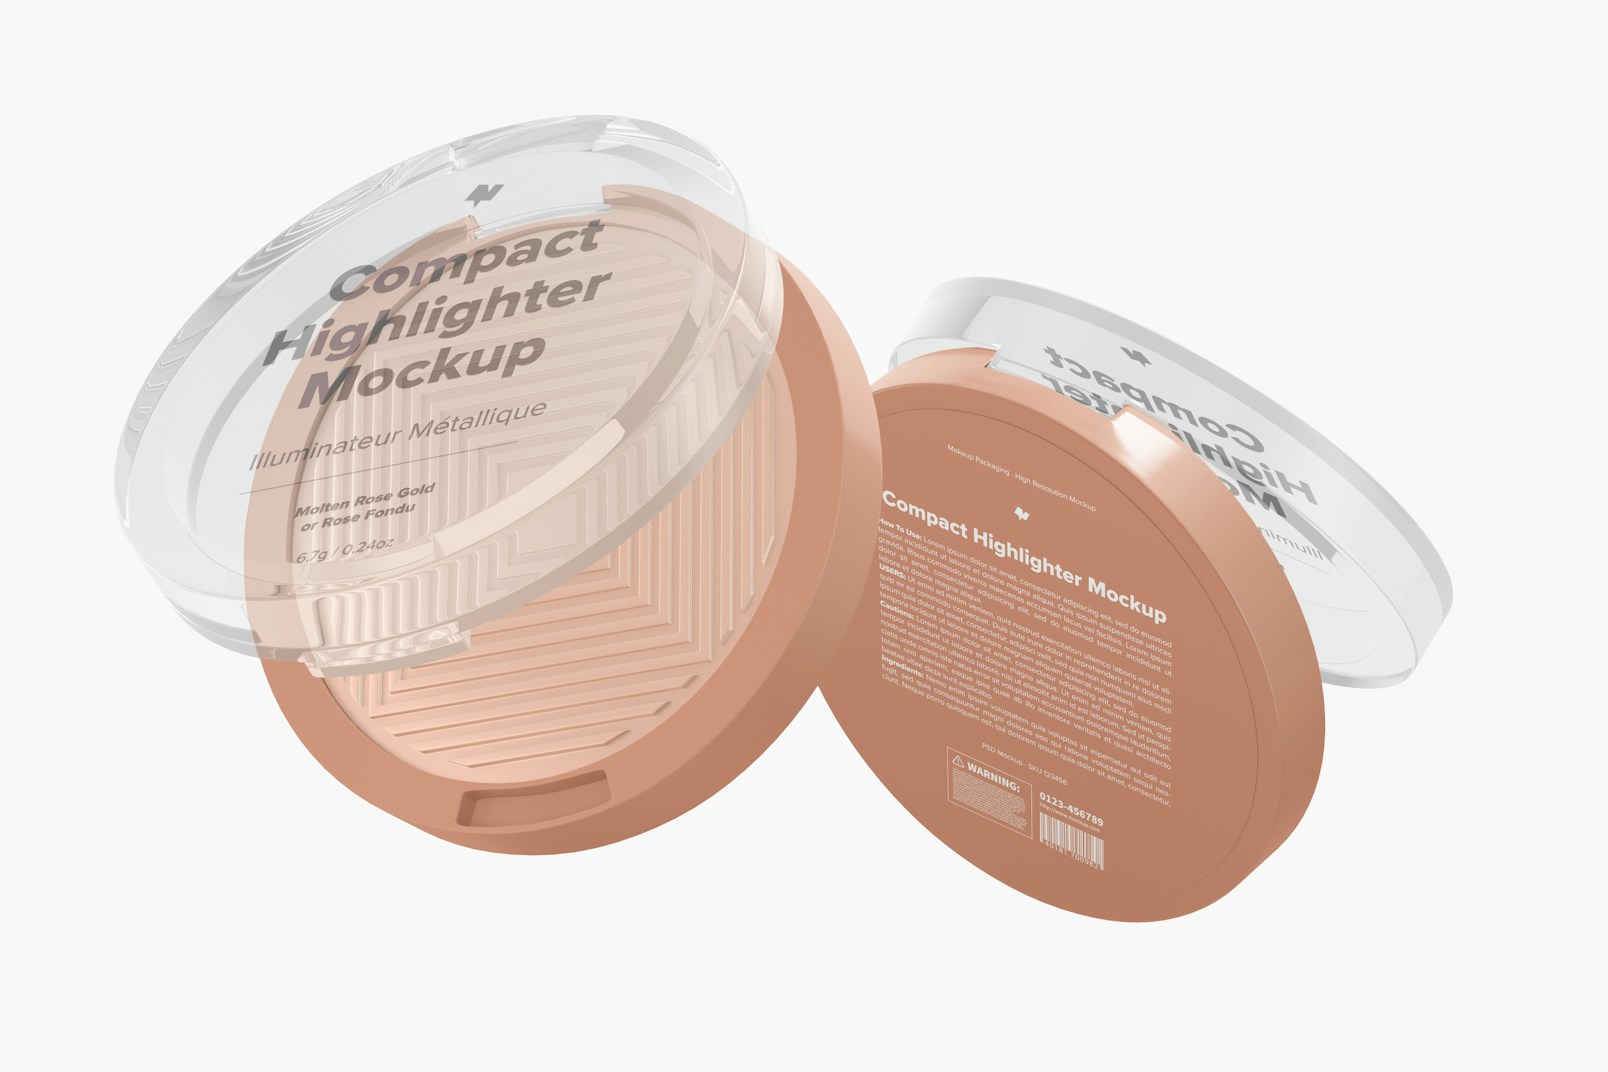 Compact Highlighter Packaging Mockup, Floating